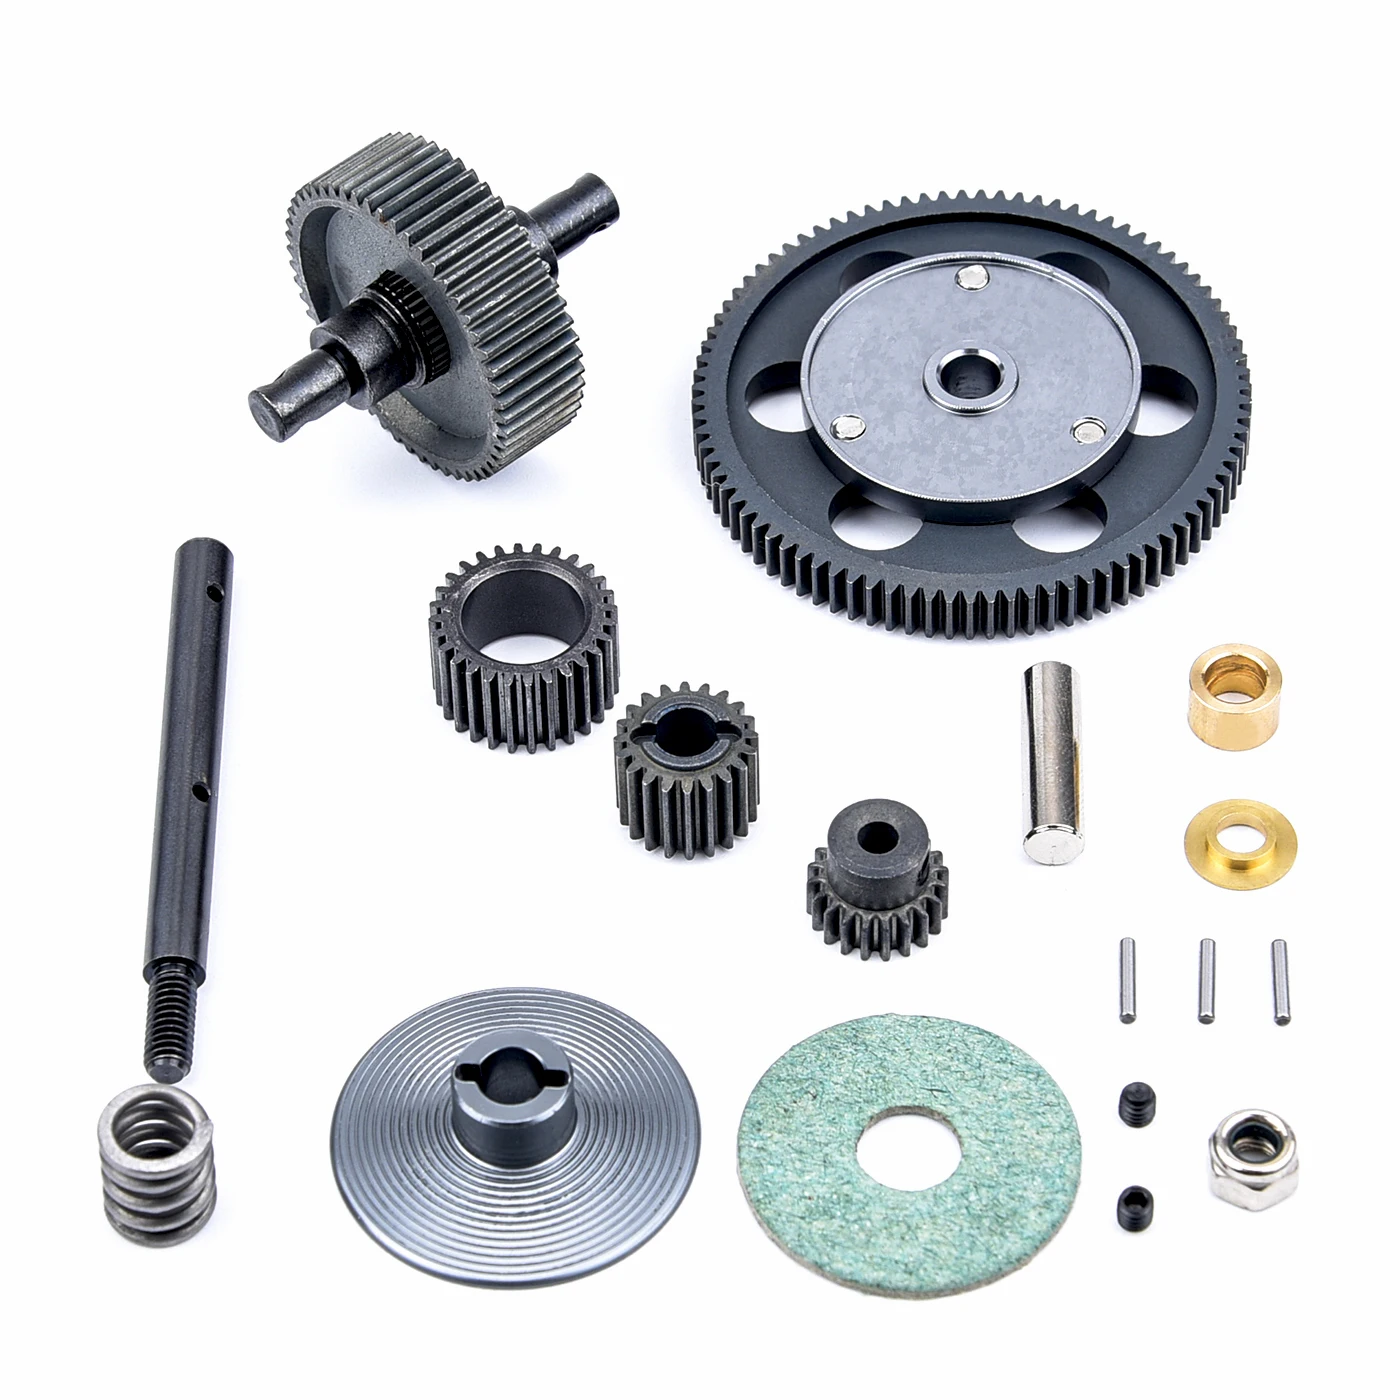 Metal Transmission Gearbox Gear Upgrade Parts for 1/10 Axial Scx10 RC Crawler for sale online 